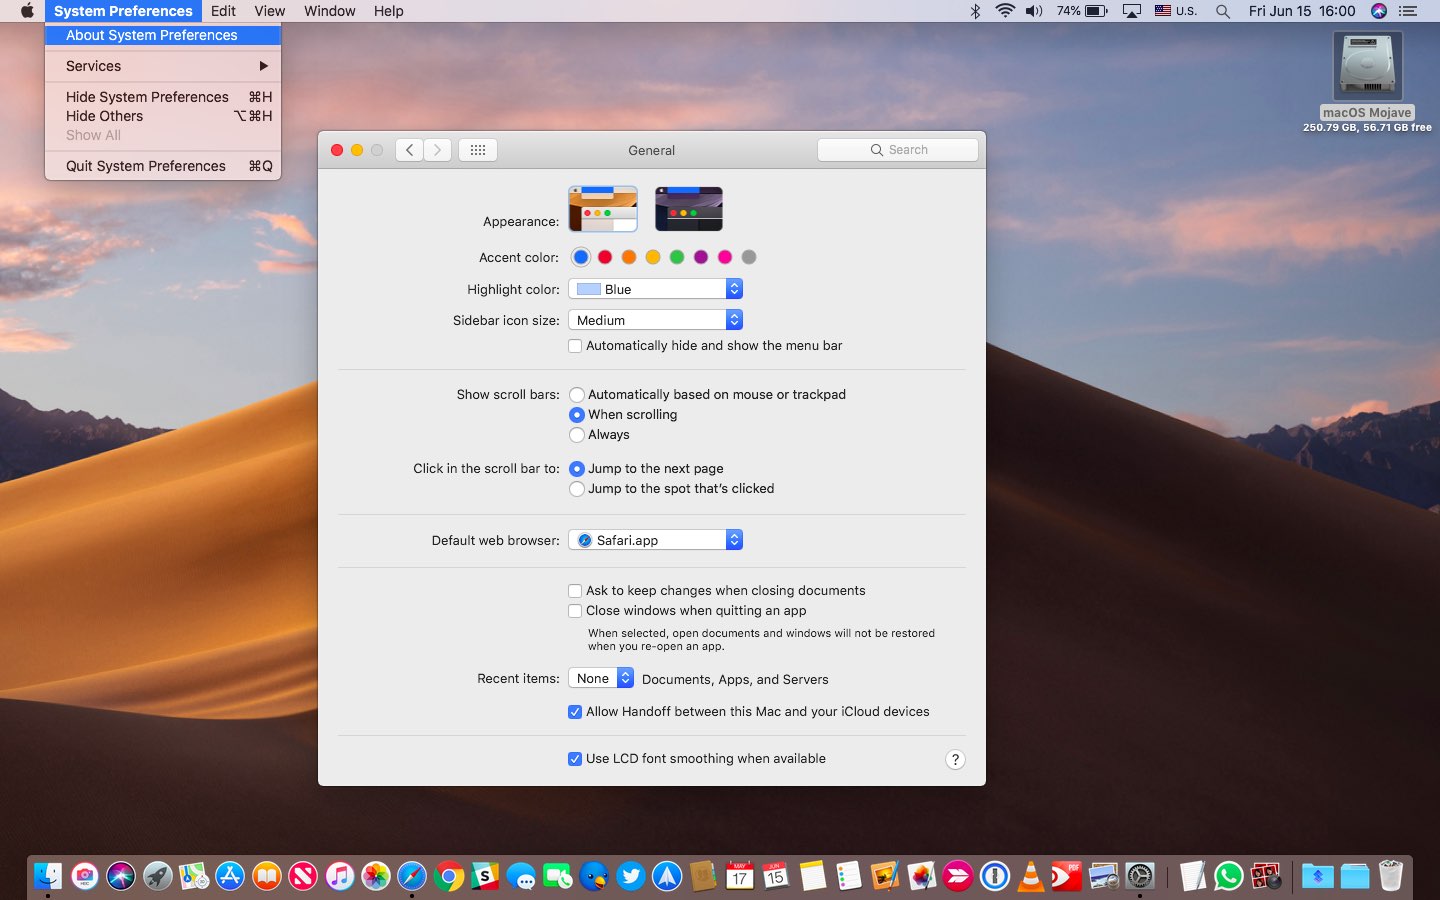 macOS Mojave Light Mode with the blue accent and highlight color